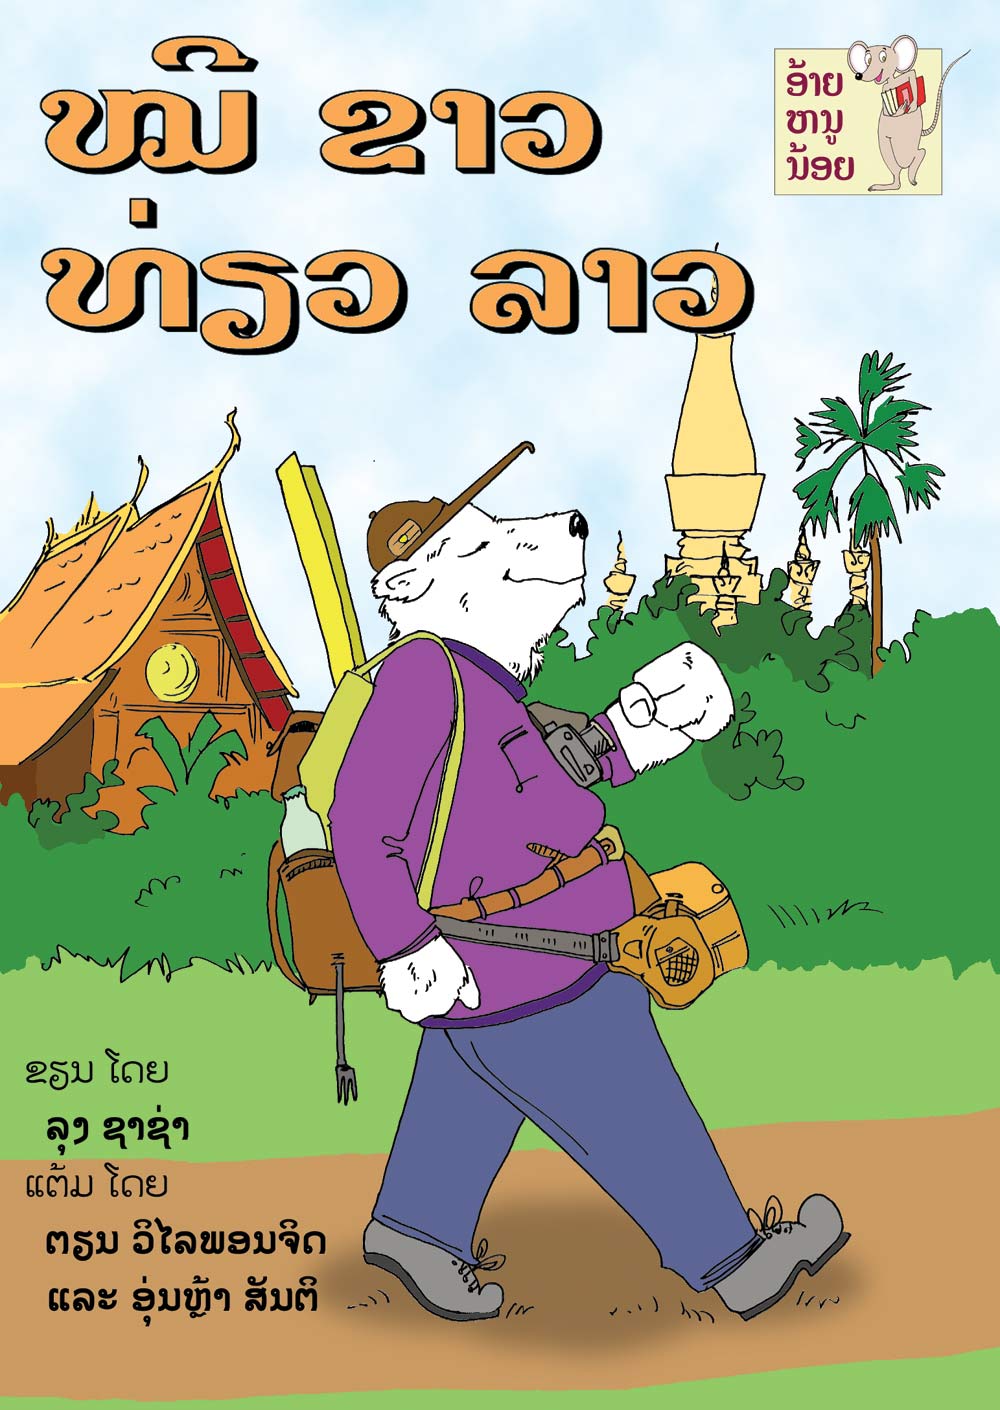 Polar Bear Visits Laos large book cover, published in Lao language